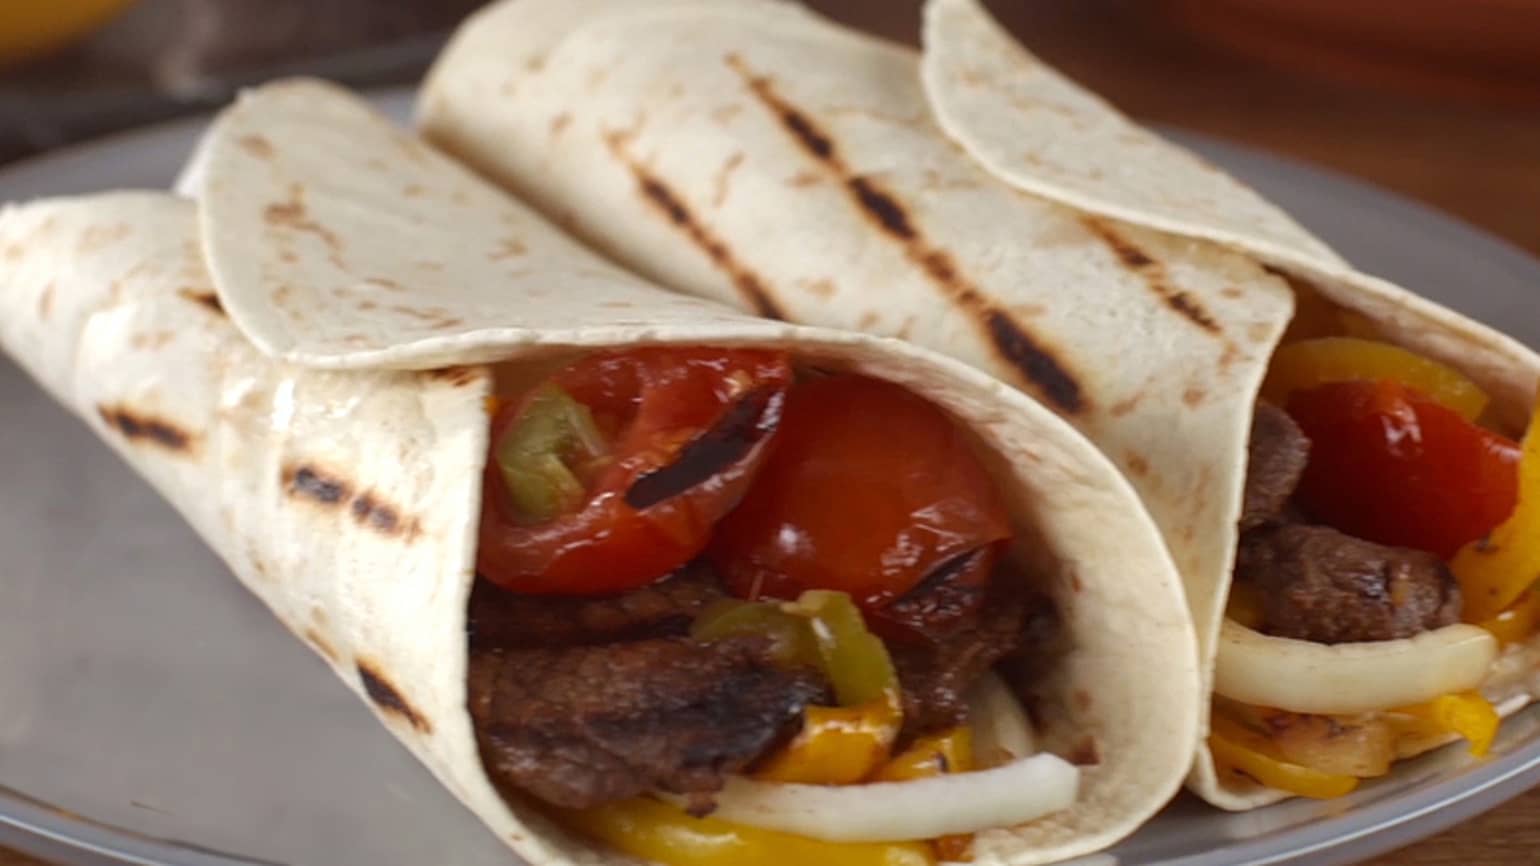 Old El Paso fajitas filled with beef, vegetables and spicy salsa